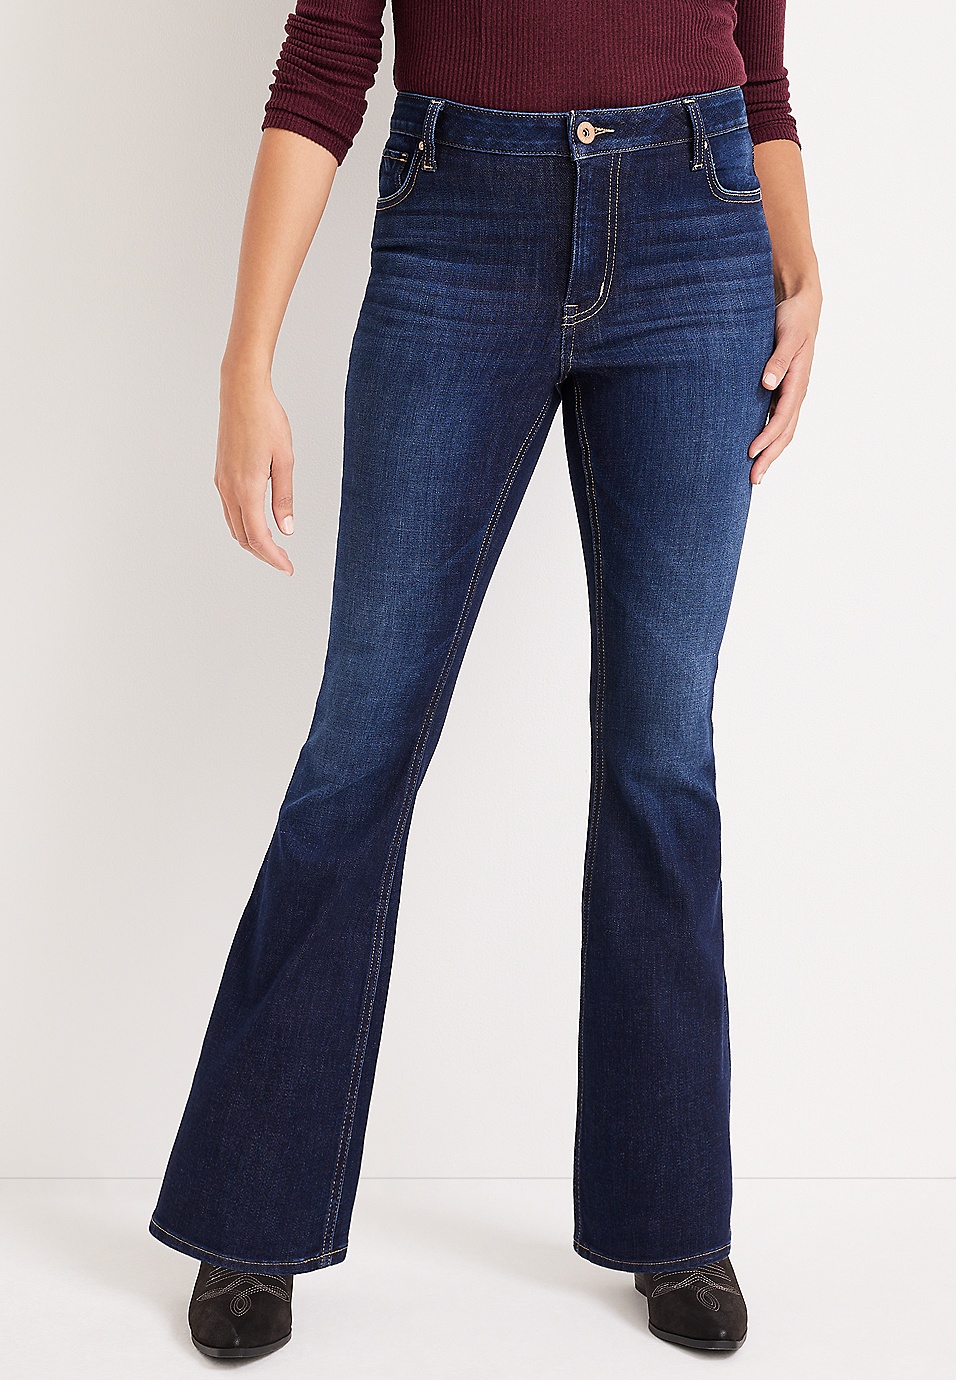 edgely™ Flare Mid Fit Mid Rise Jean